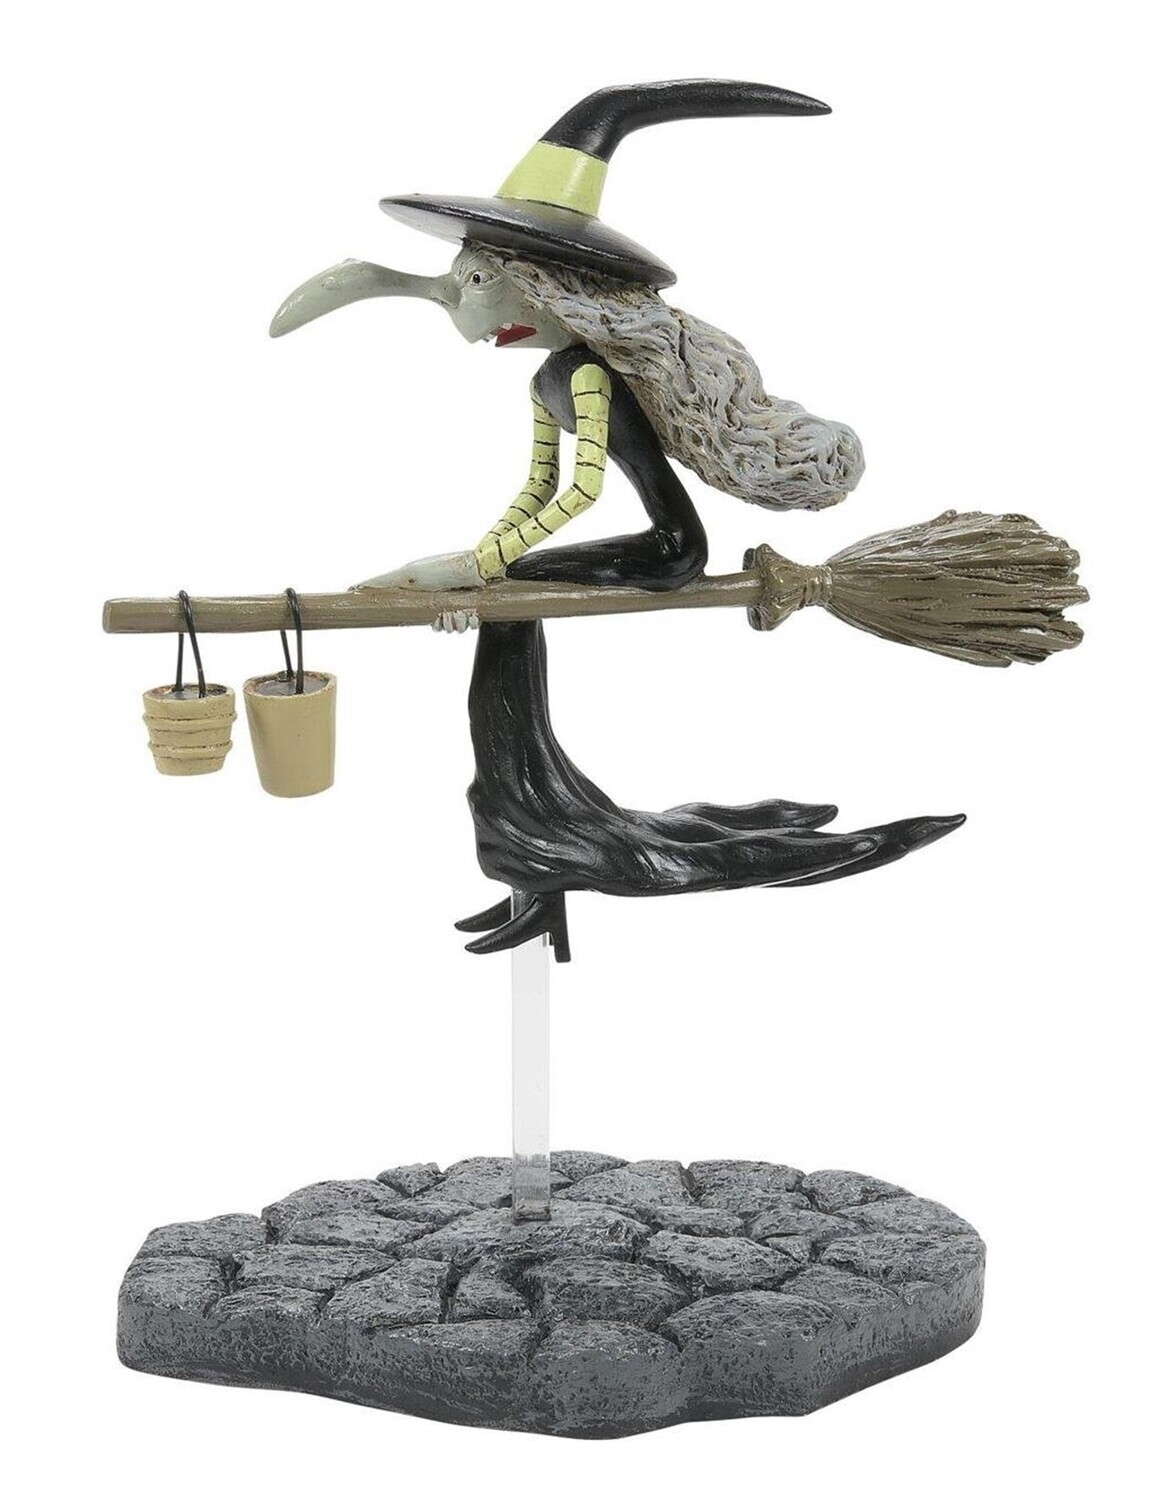 Department 56 The Nightmare Before Christmas Village "Helgamine" Witch Figurine (6012292)